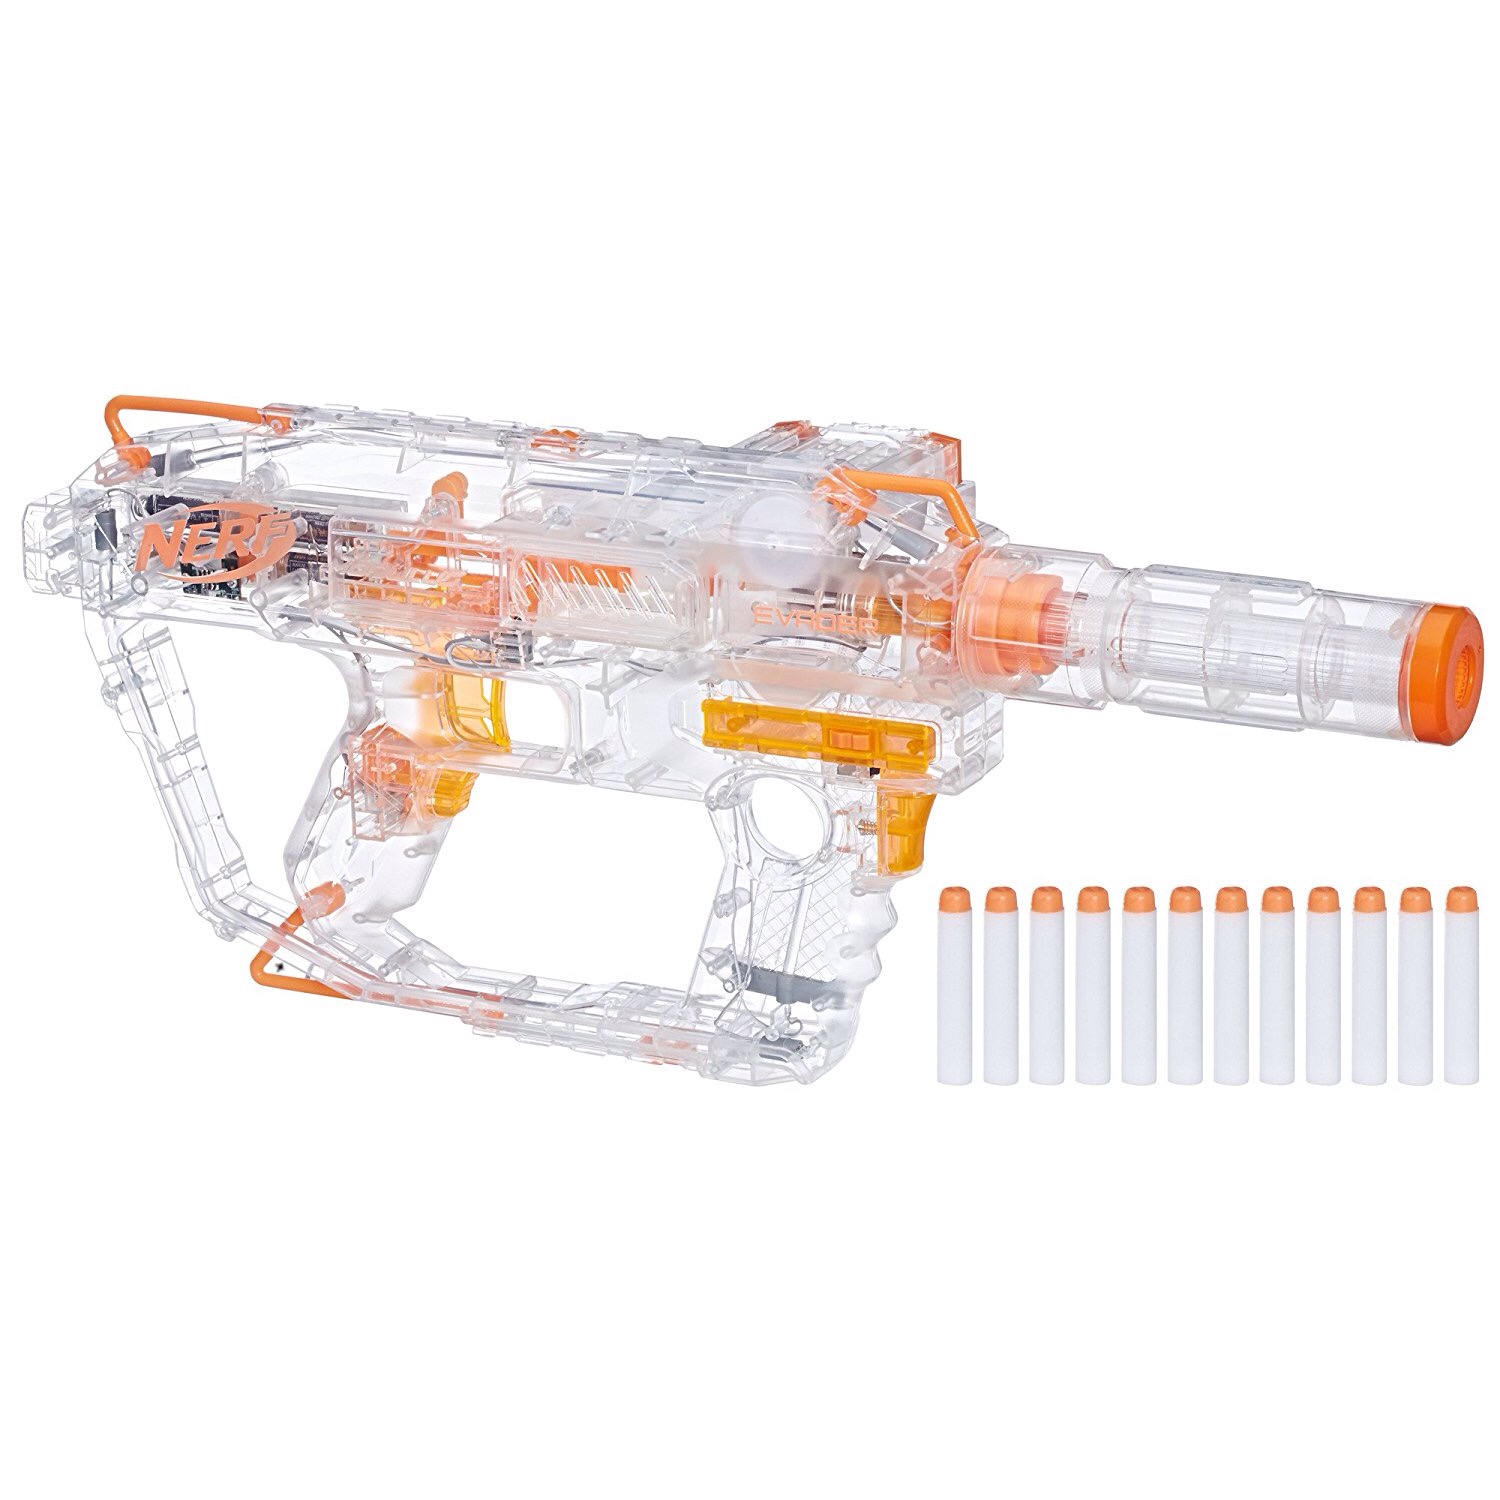 nerf shadow ops evader